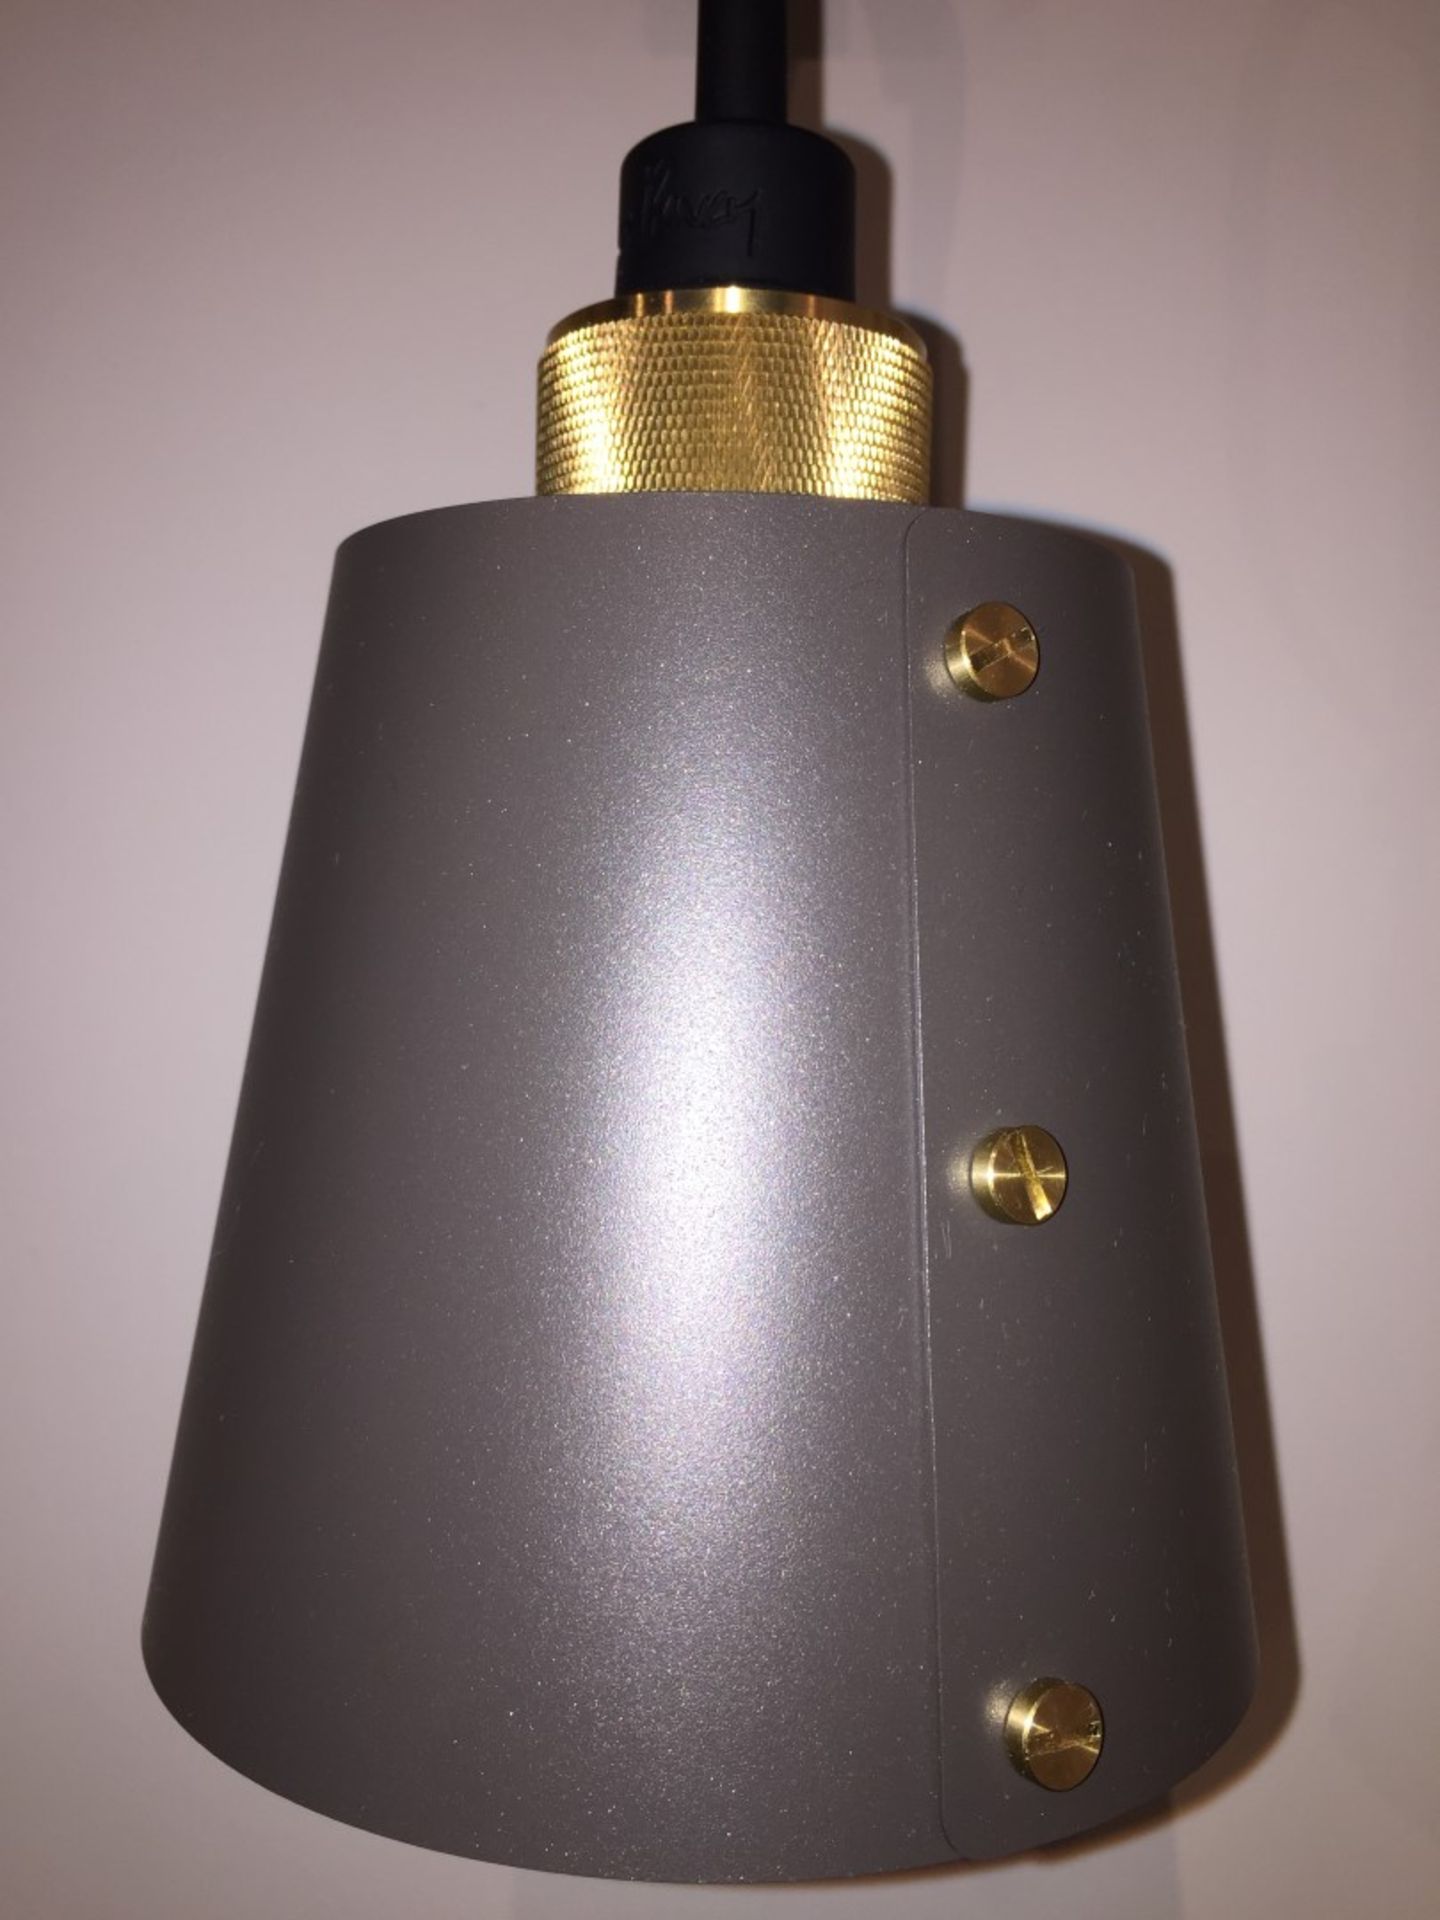 1 x BUSTER + PUNCH Hooked Wall Light With Metal Shade - Ref: WS/FF160B - CL204 - Location: London Ci - Image 7 of 11